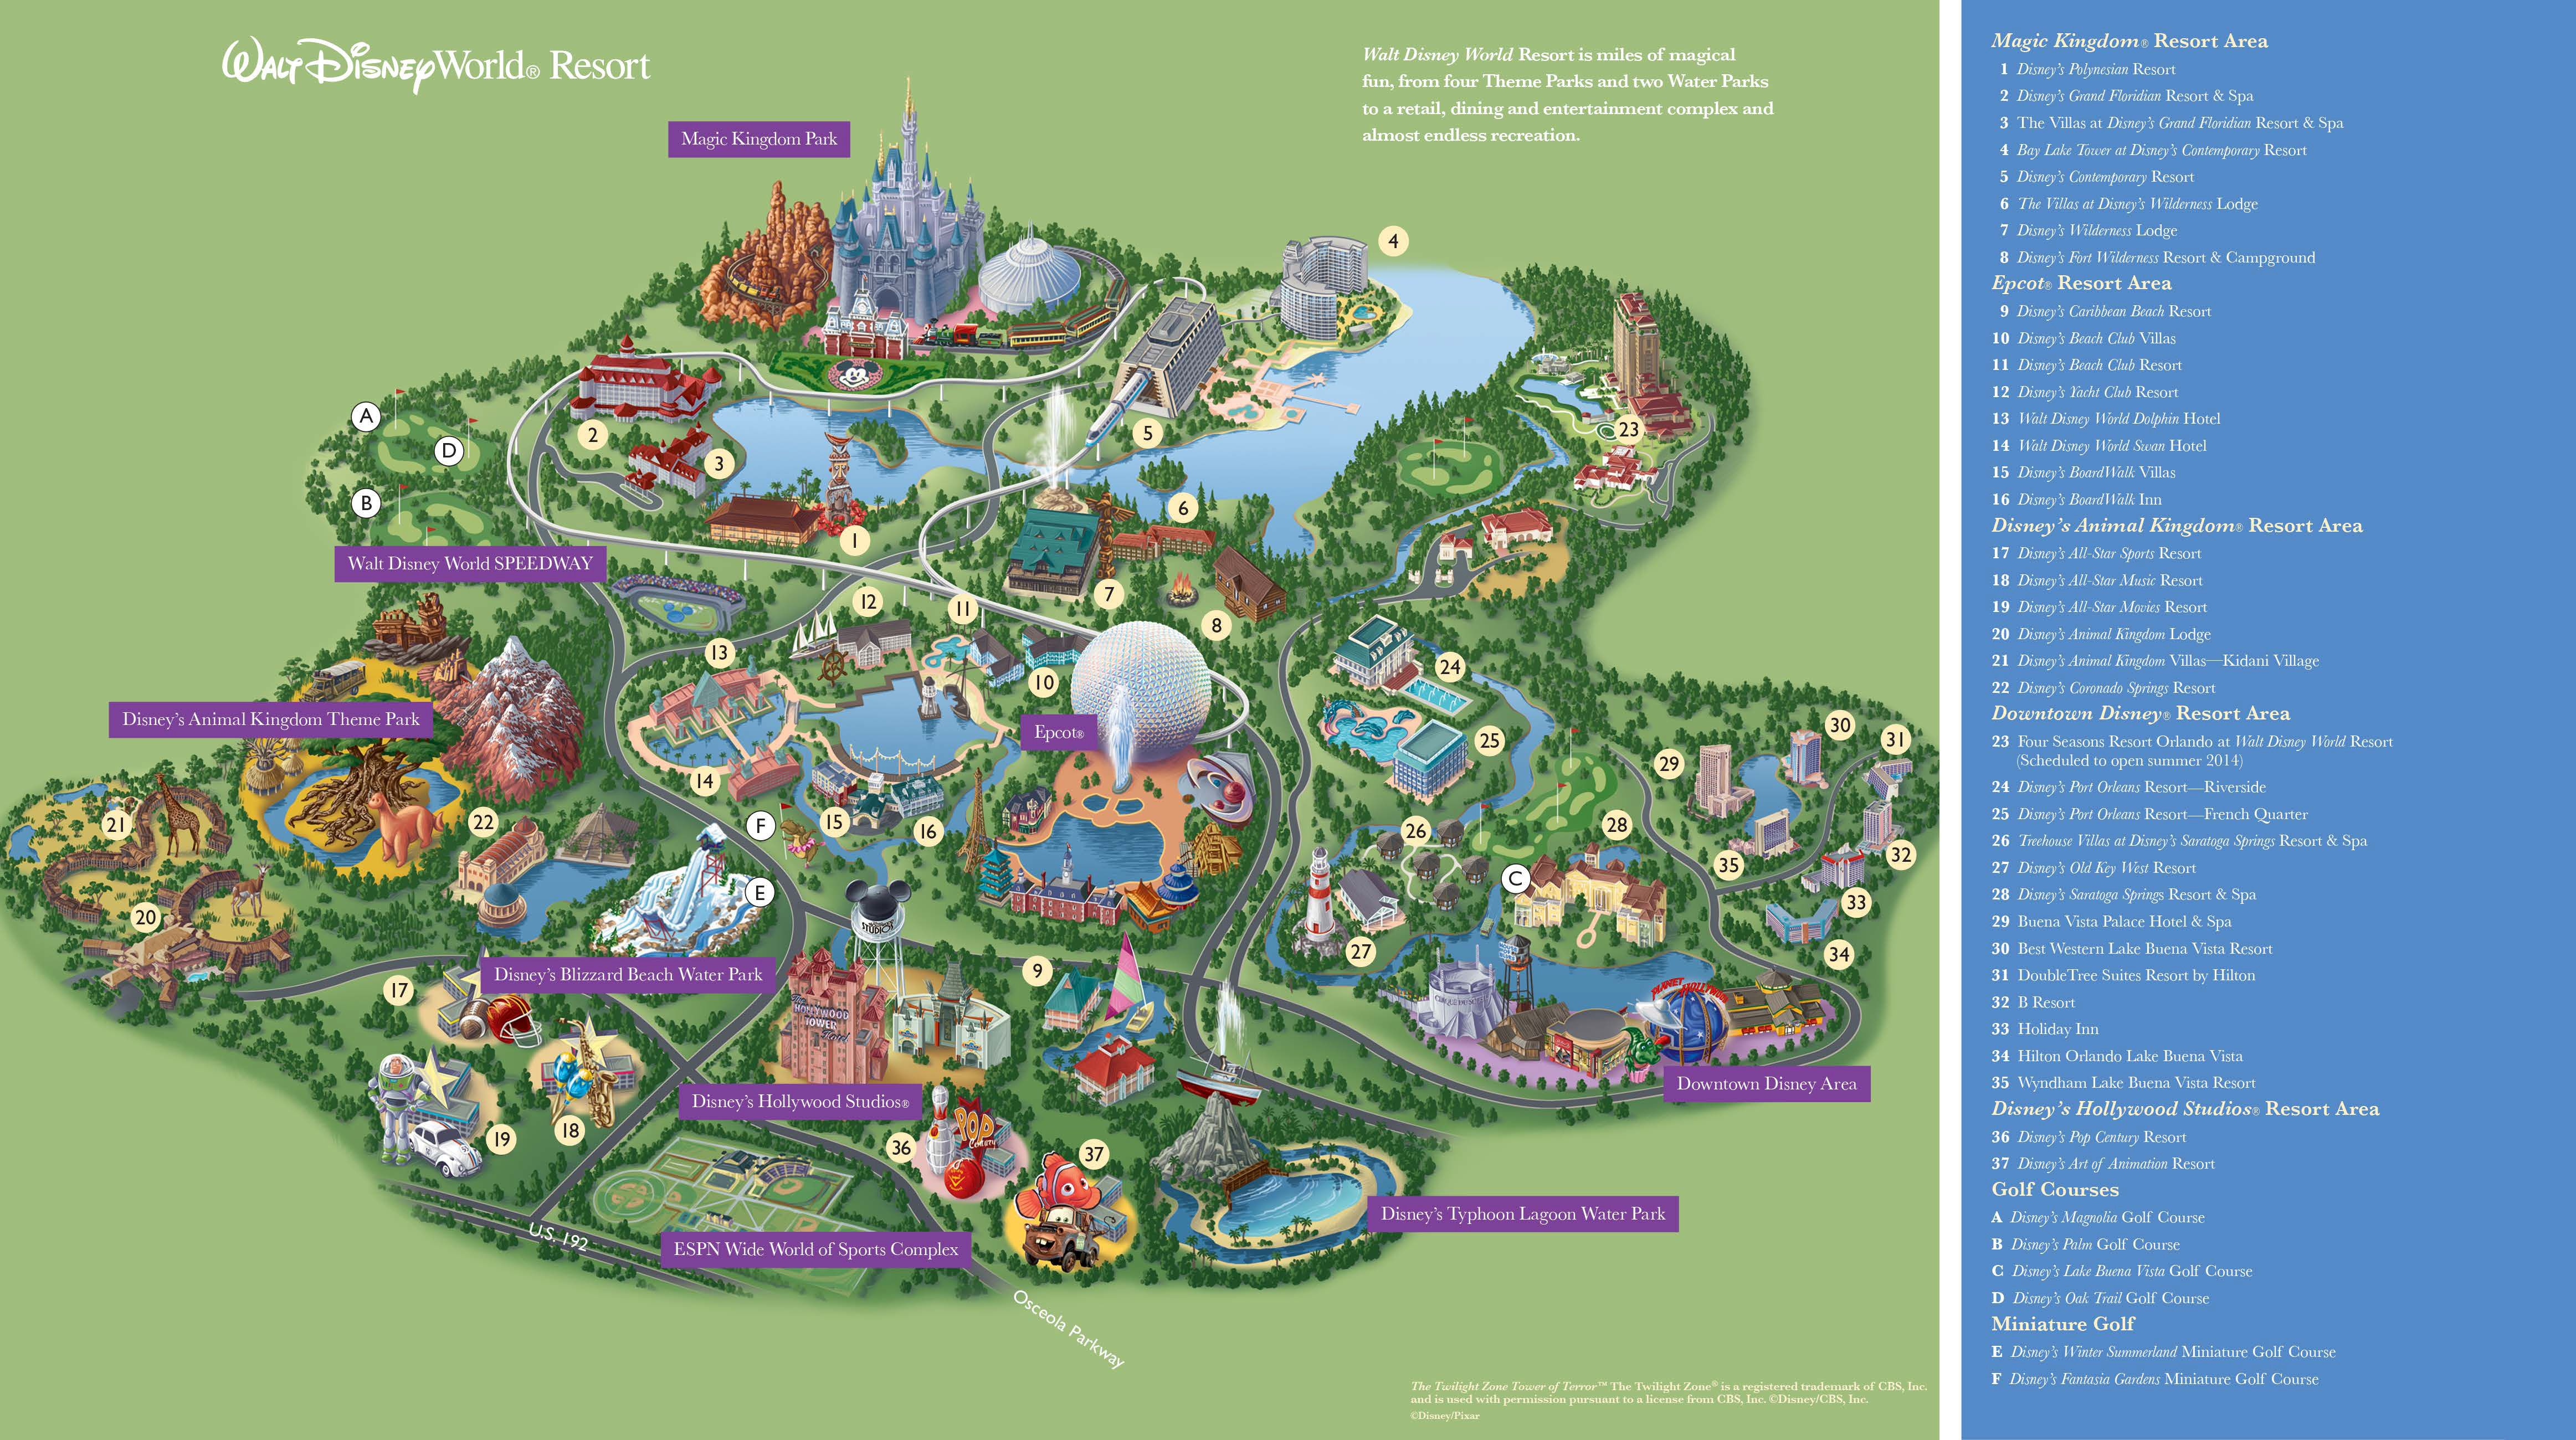 Walt Disney World Maps - Parks And Resorts In 2019 | Travel - Theme - Map Of Florida Showing Disney World